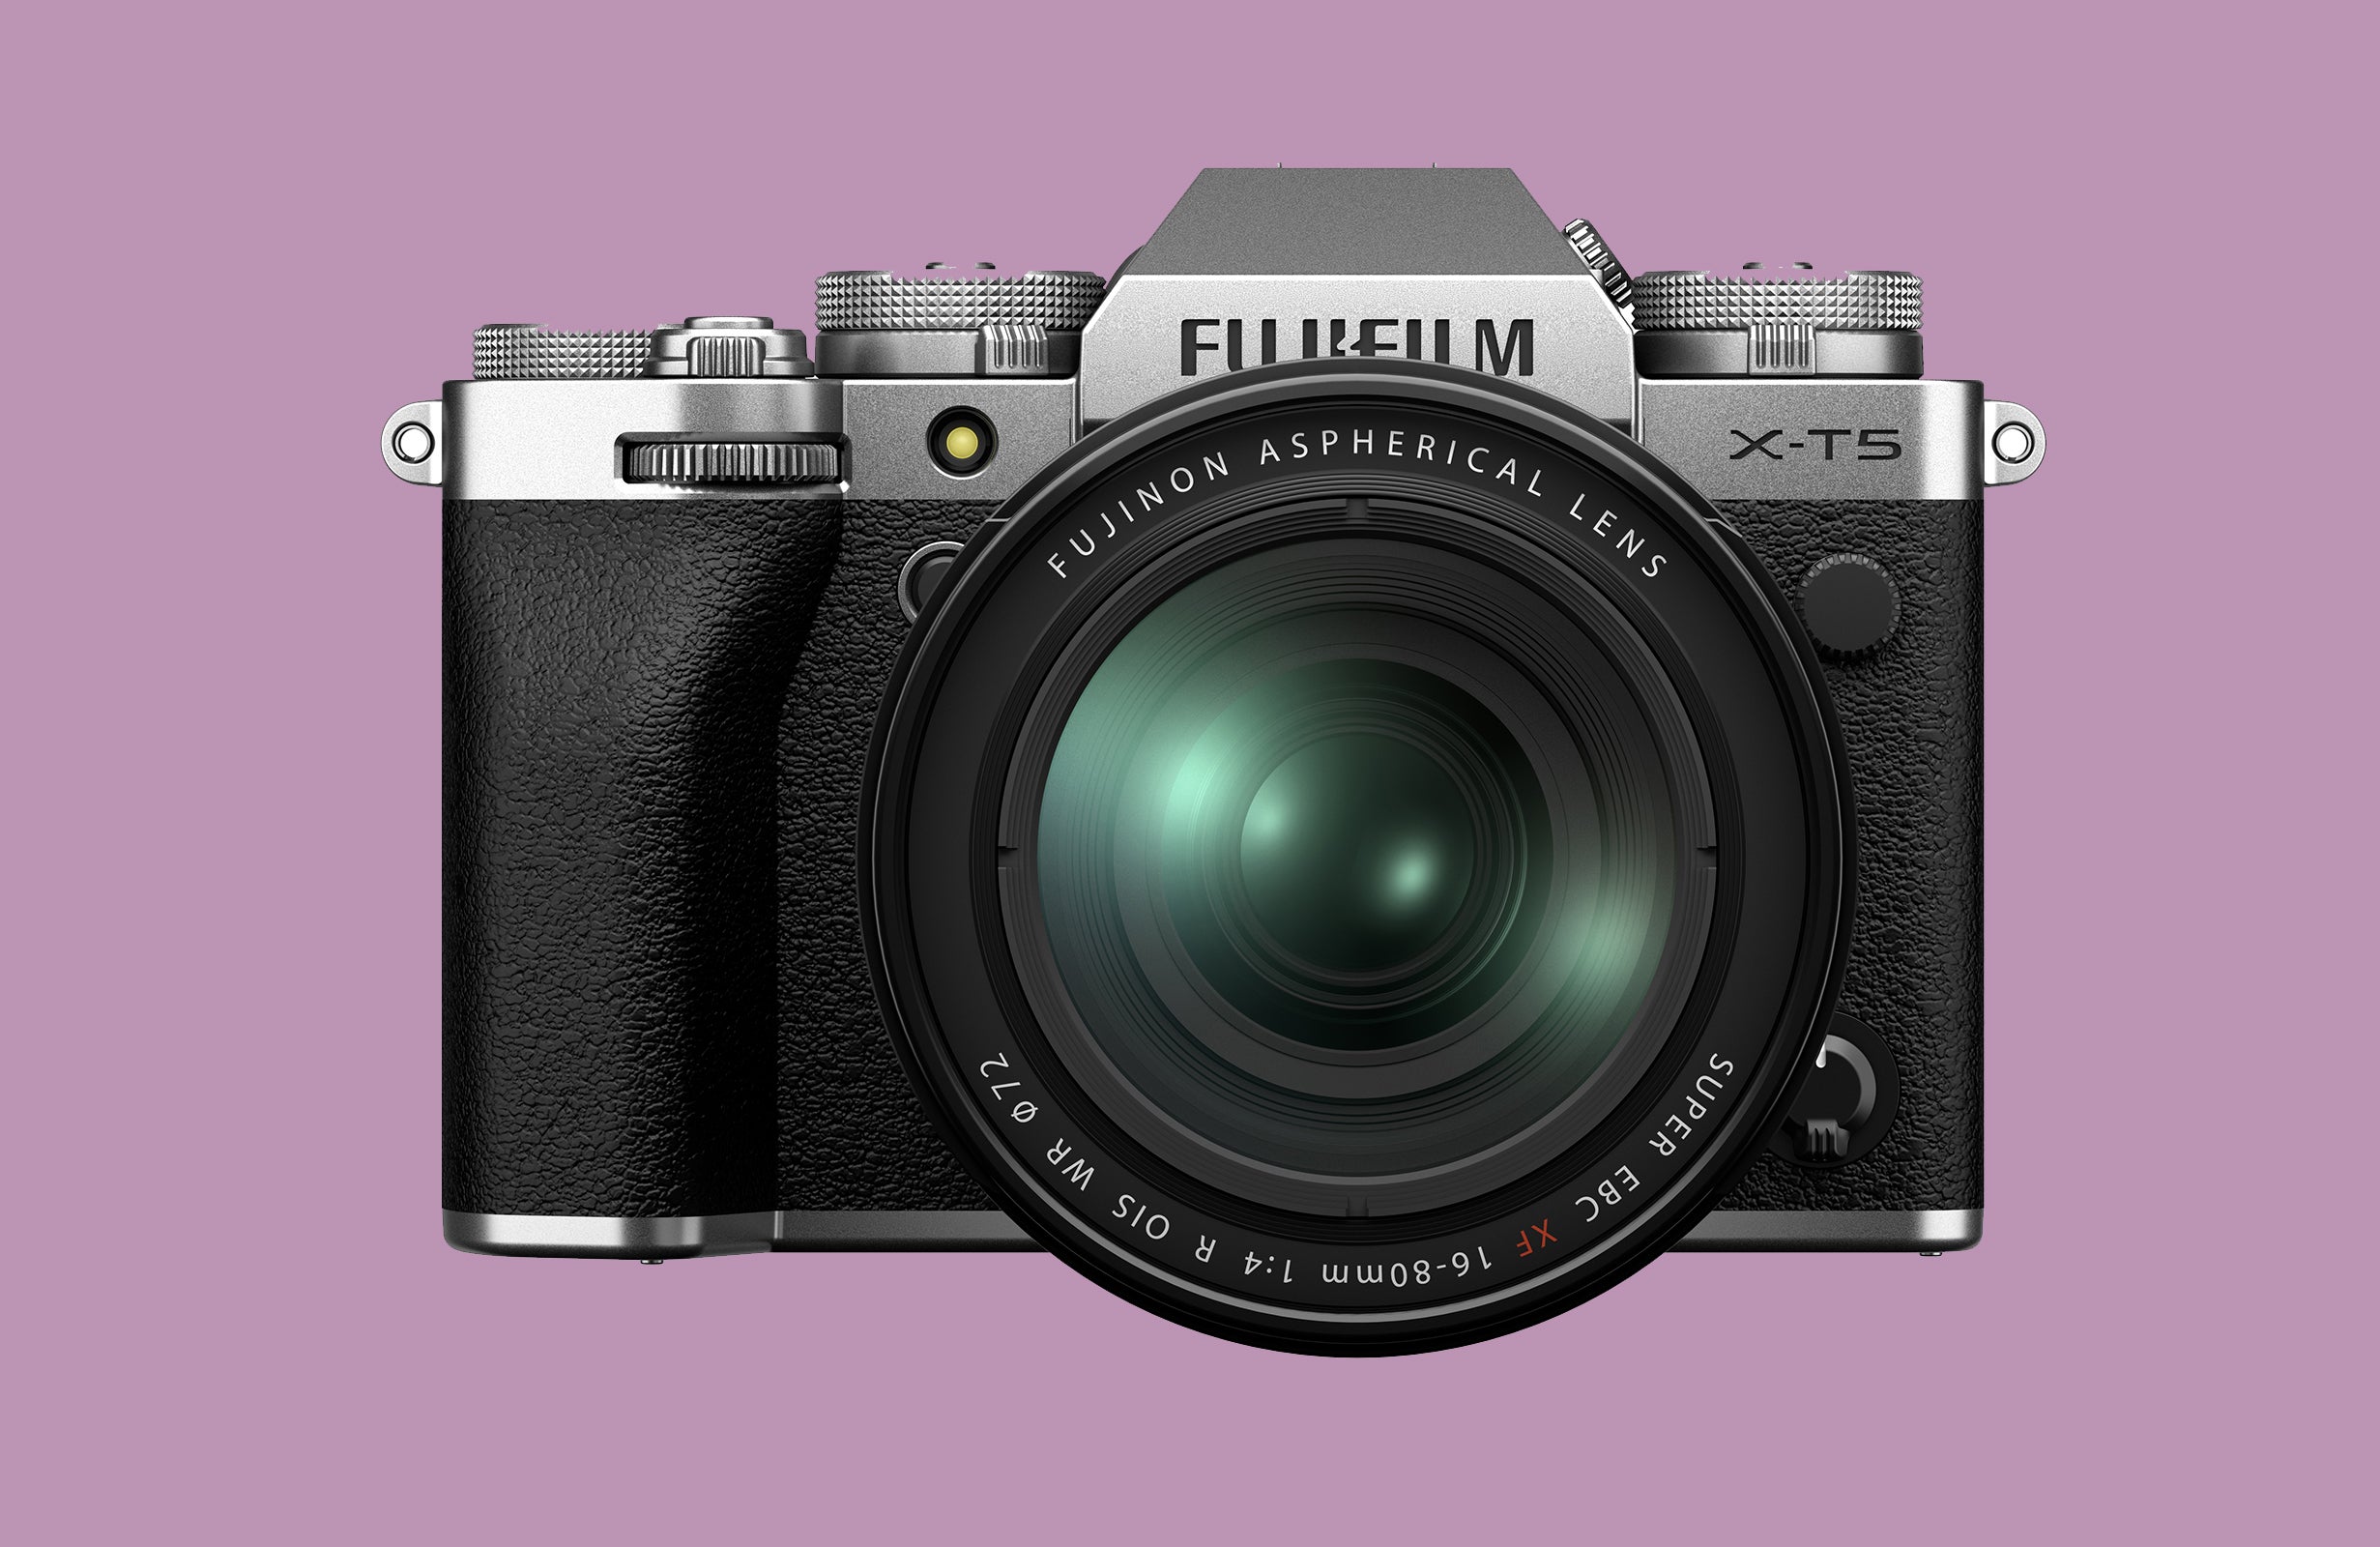 The Fujifilm X-T5 keeps the classic style.